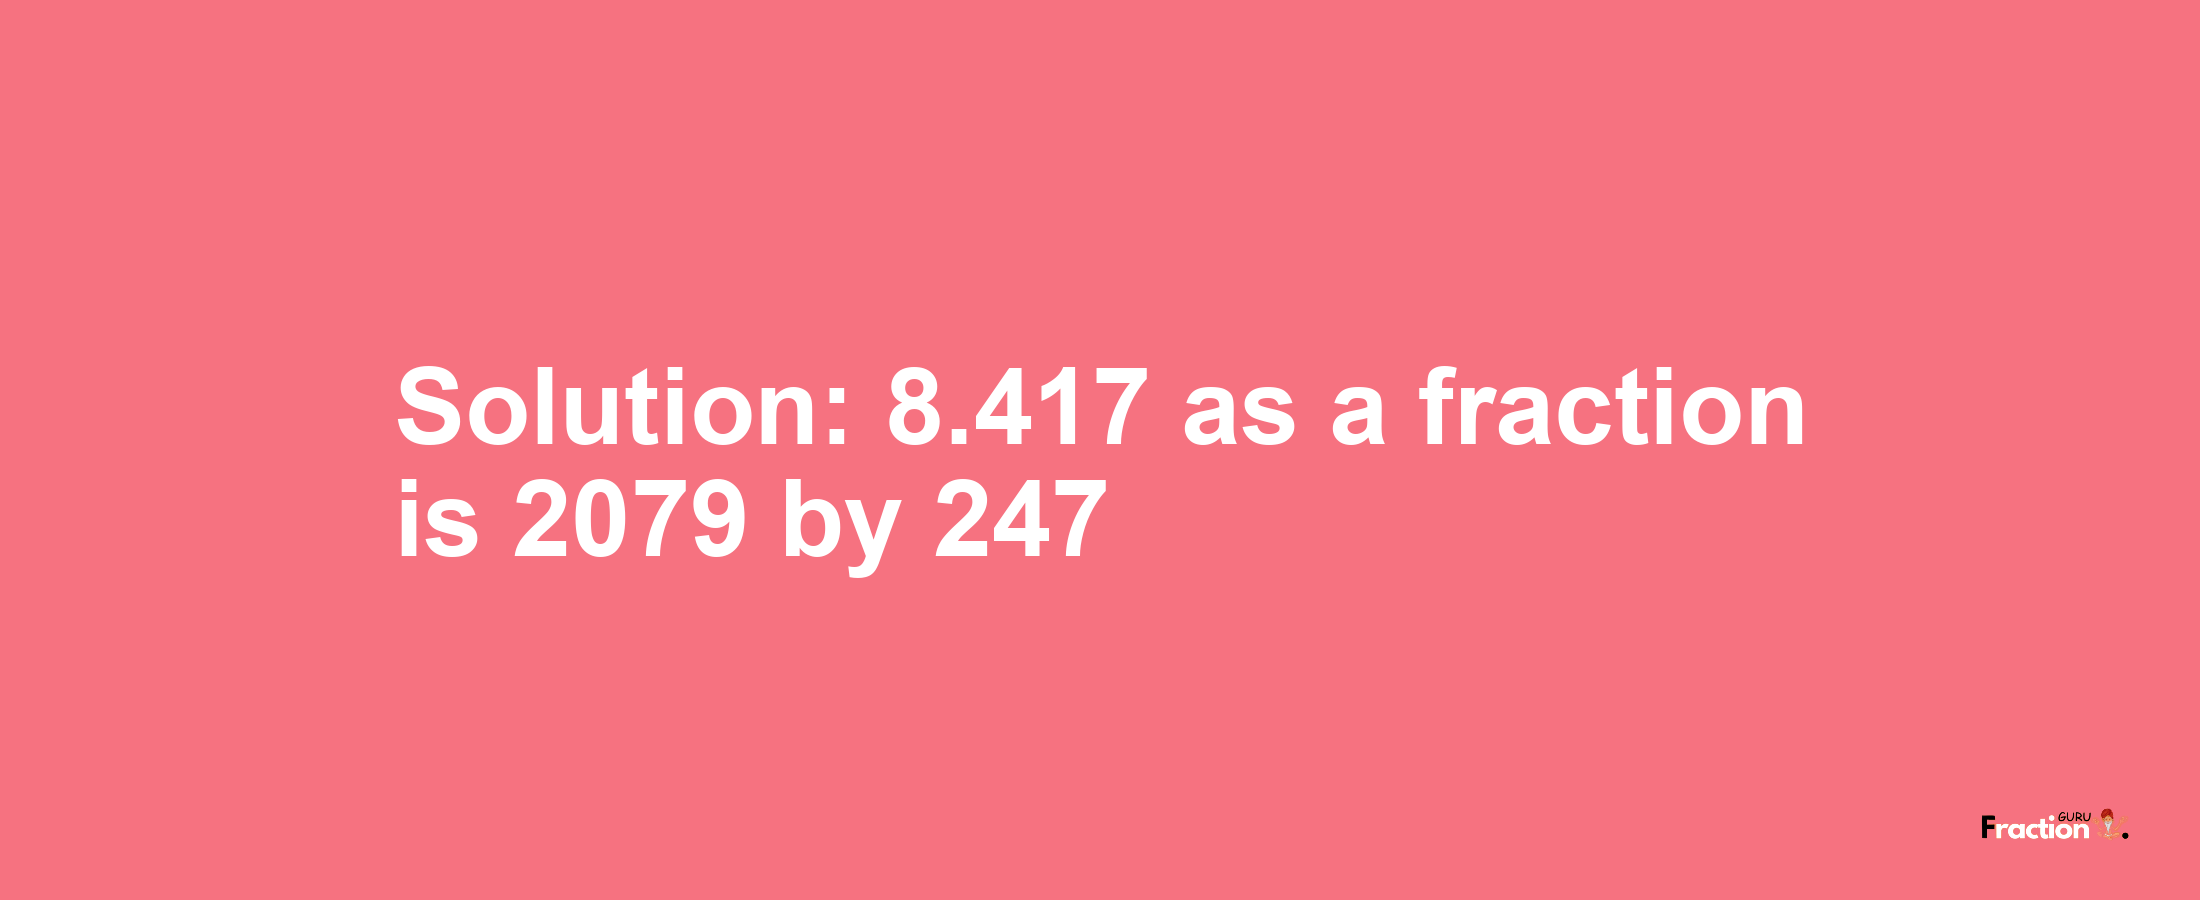 Solution:8.417 as a fraction is 2079/247